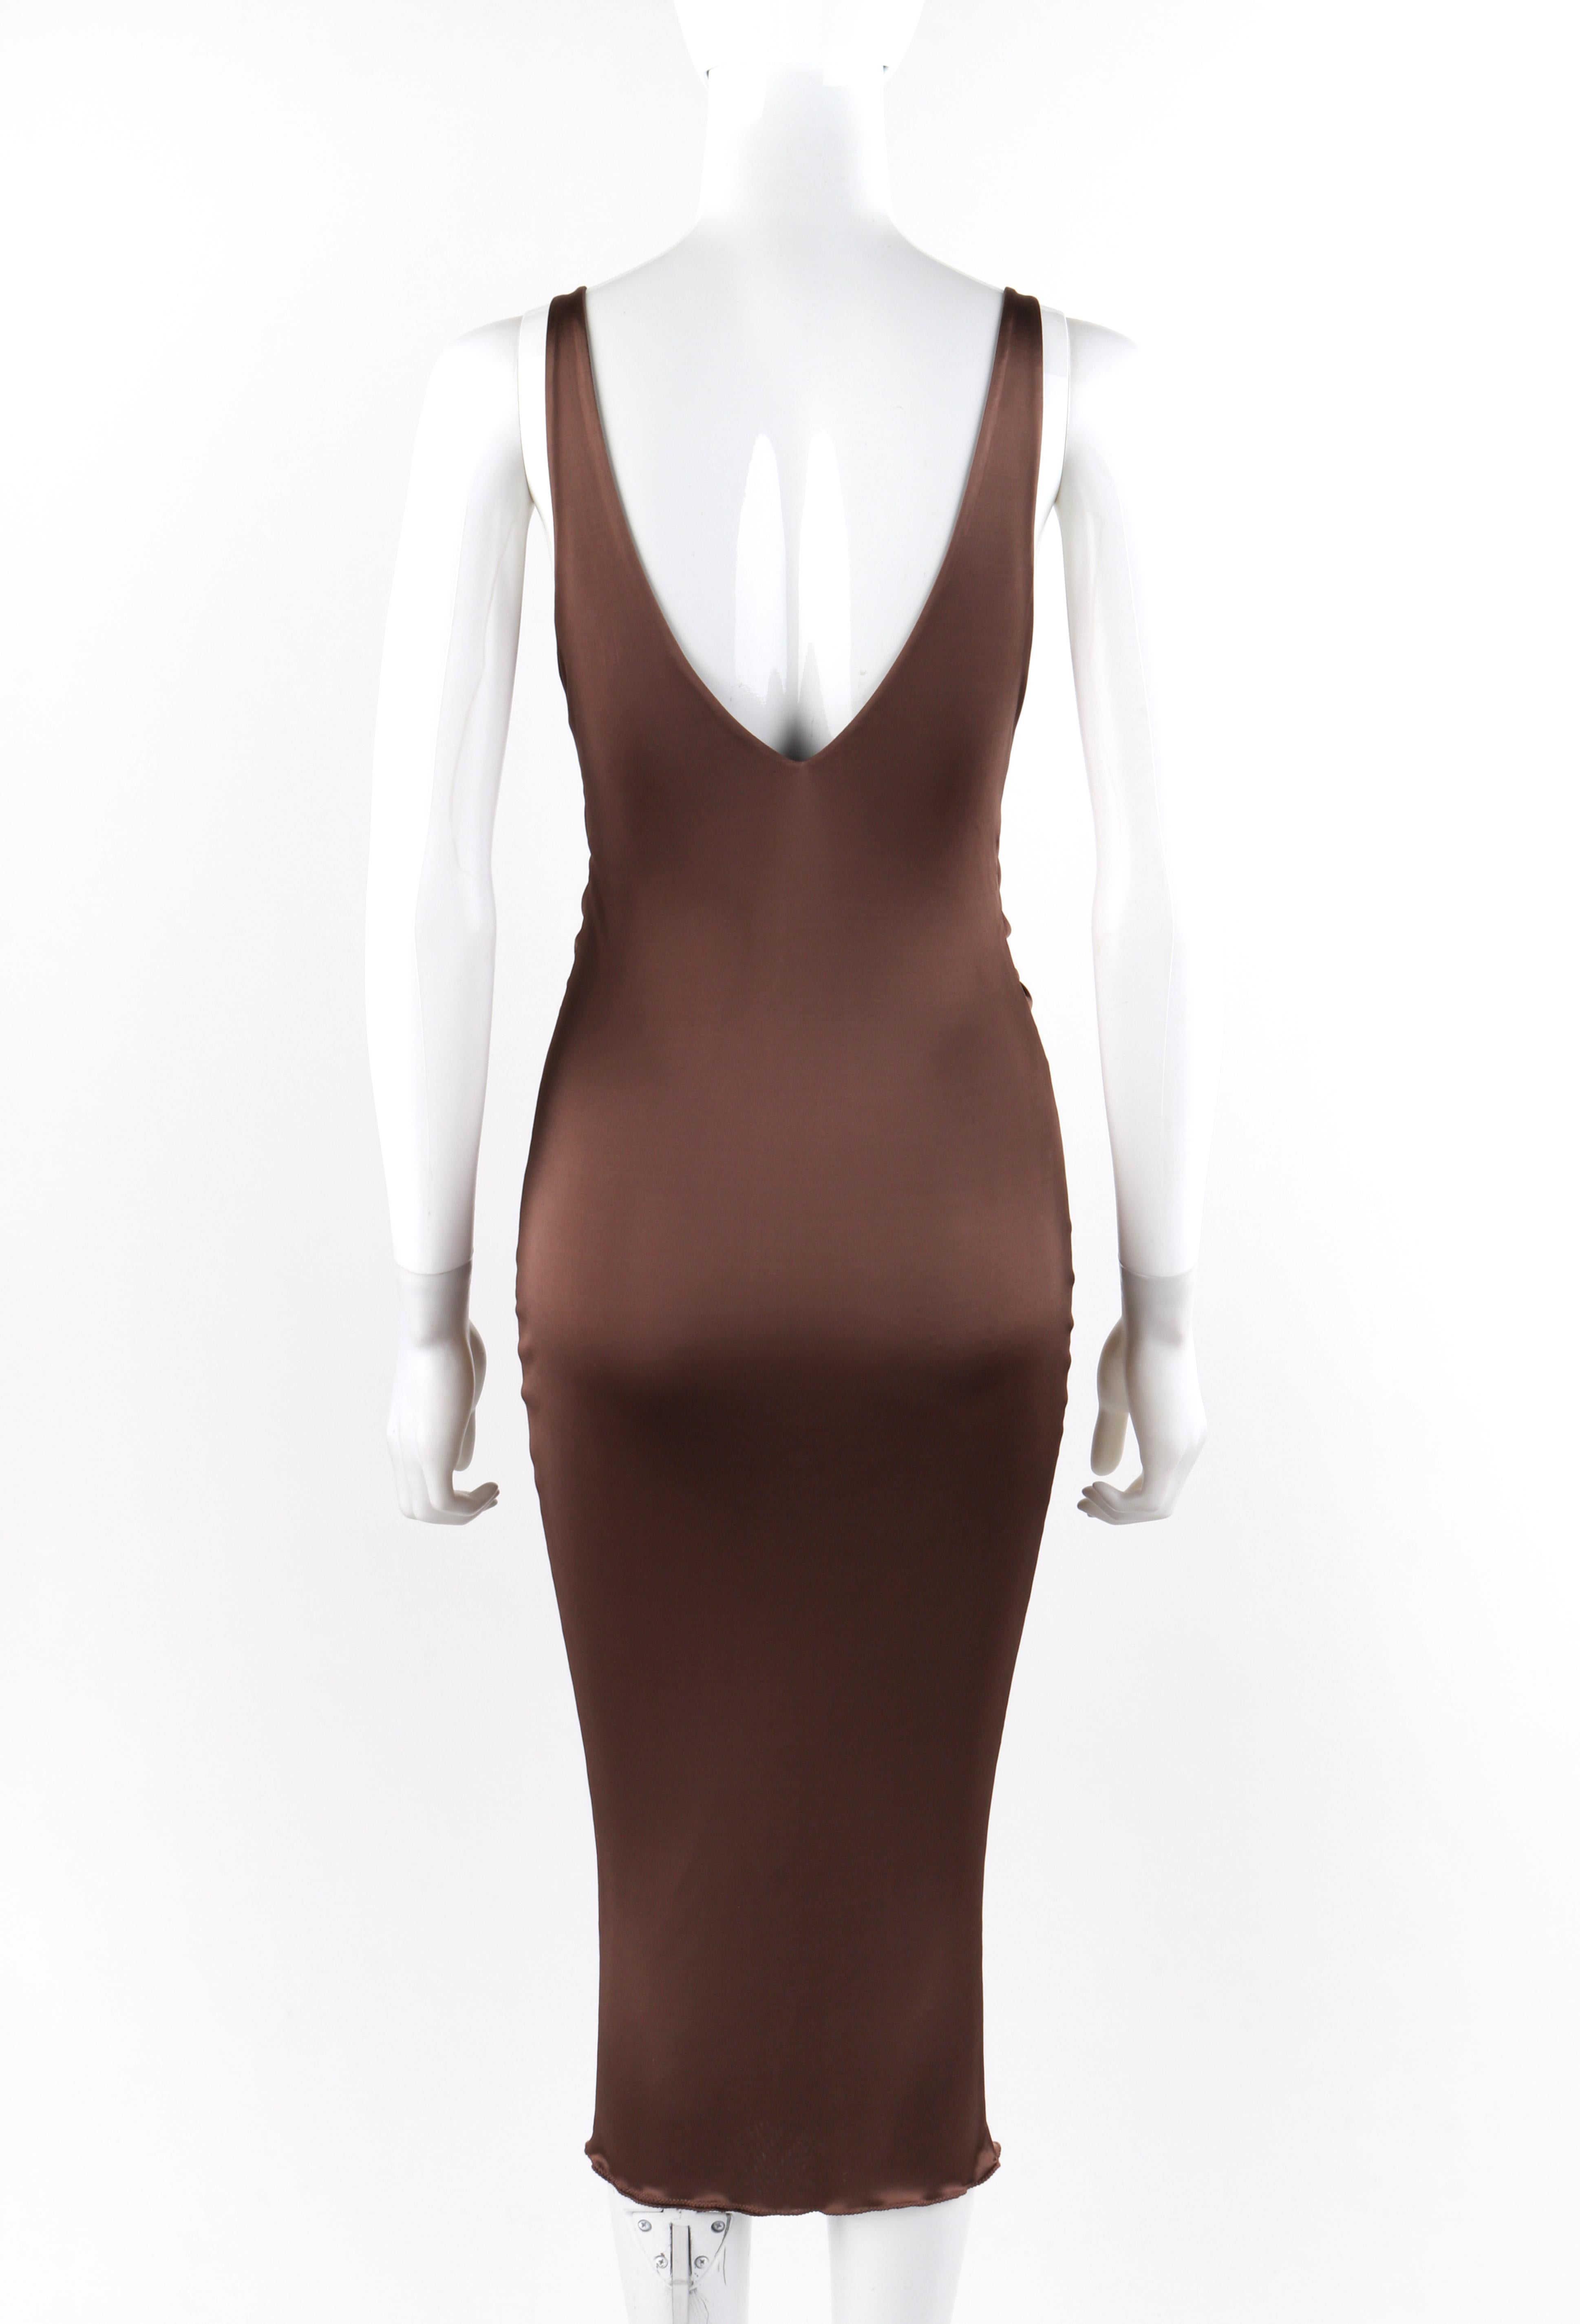 Women's ALEXANDER McQUEEN S/S 1996 Brown Plunging Keyhole Neck Bodycon Midi Dress For Sale